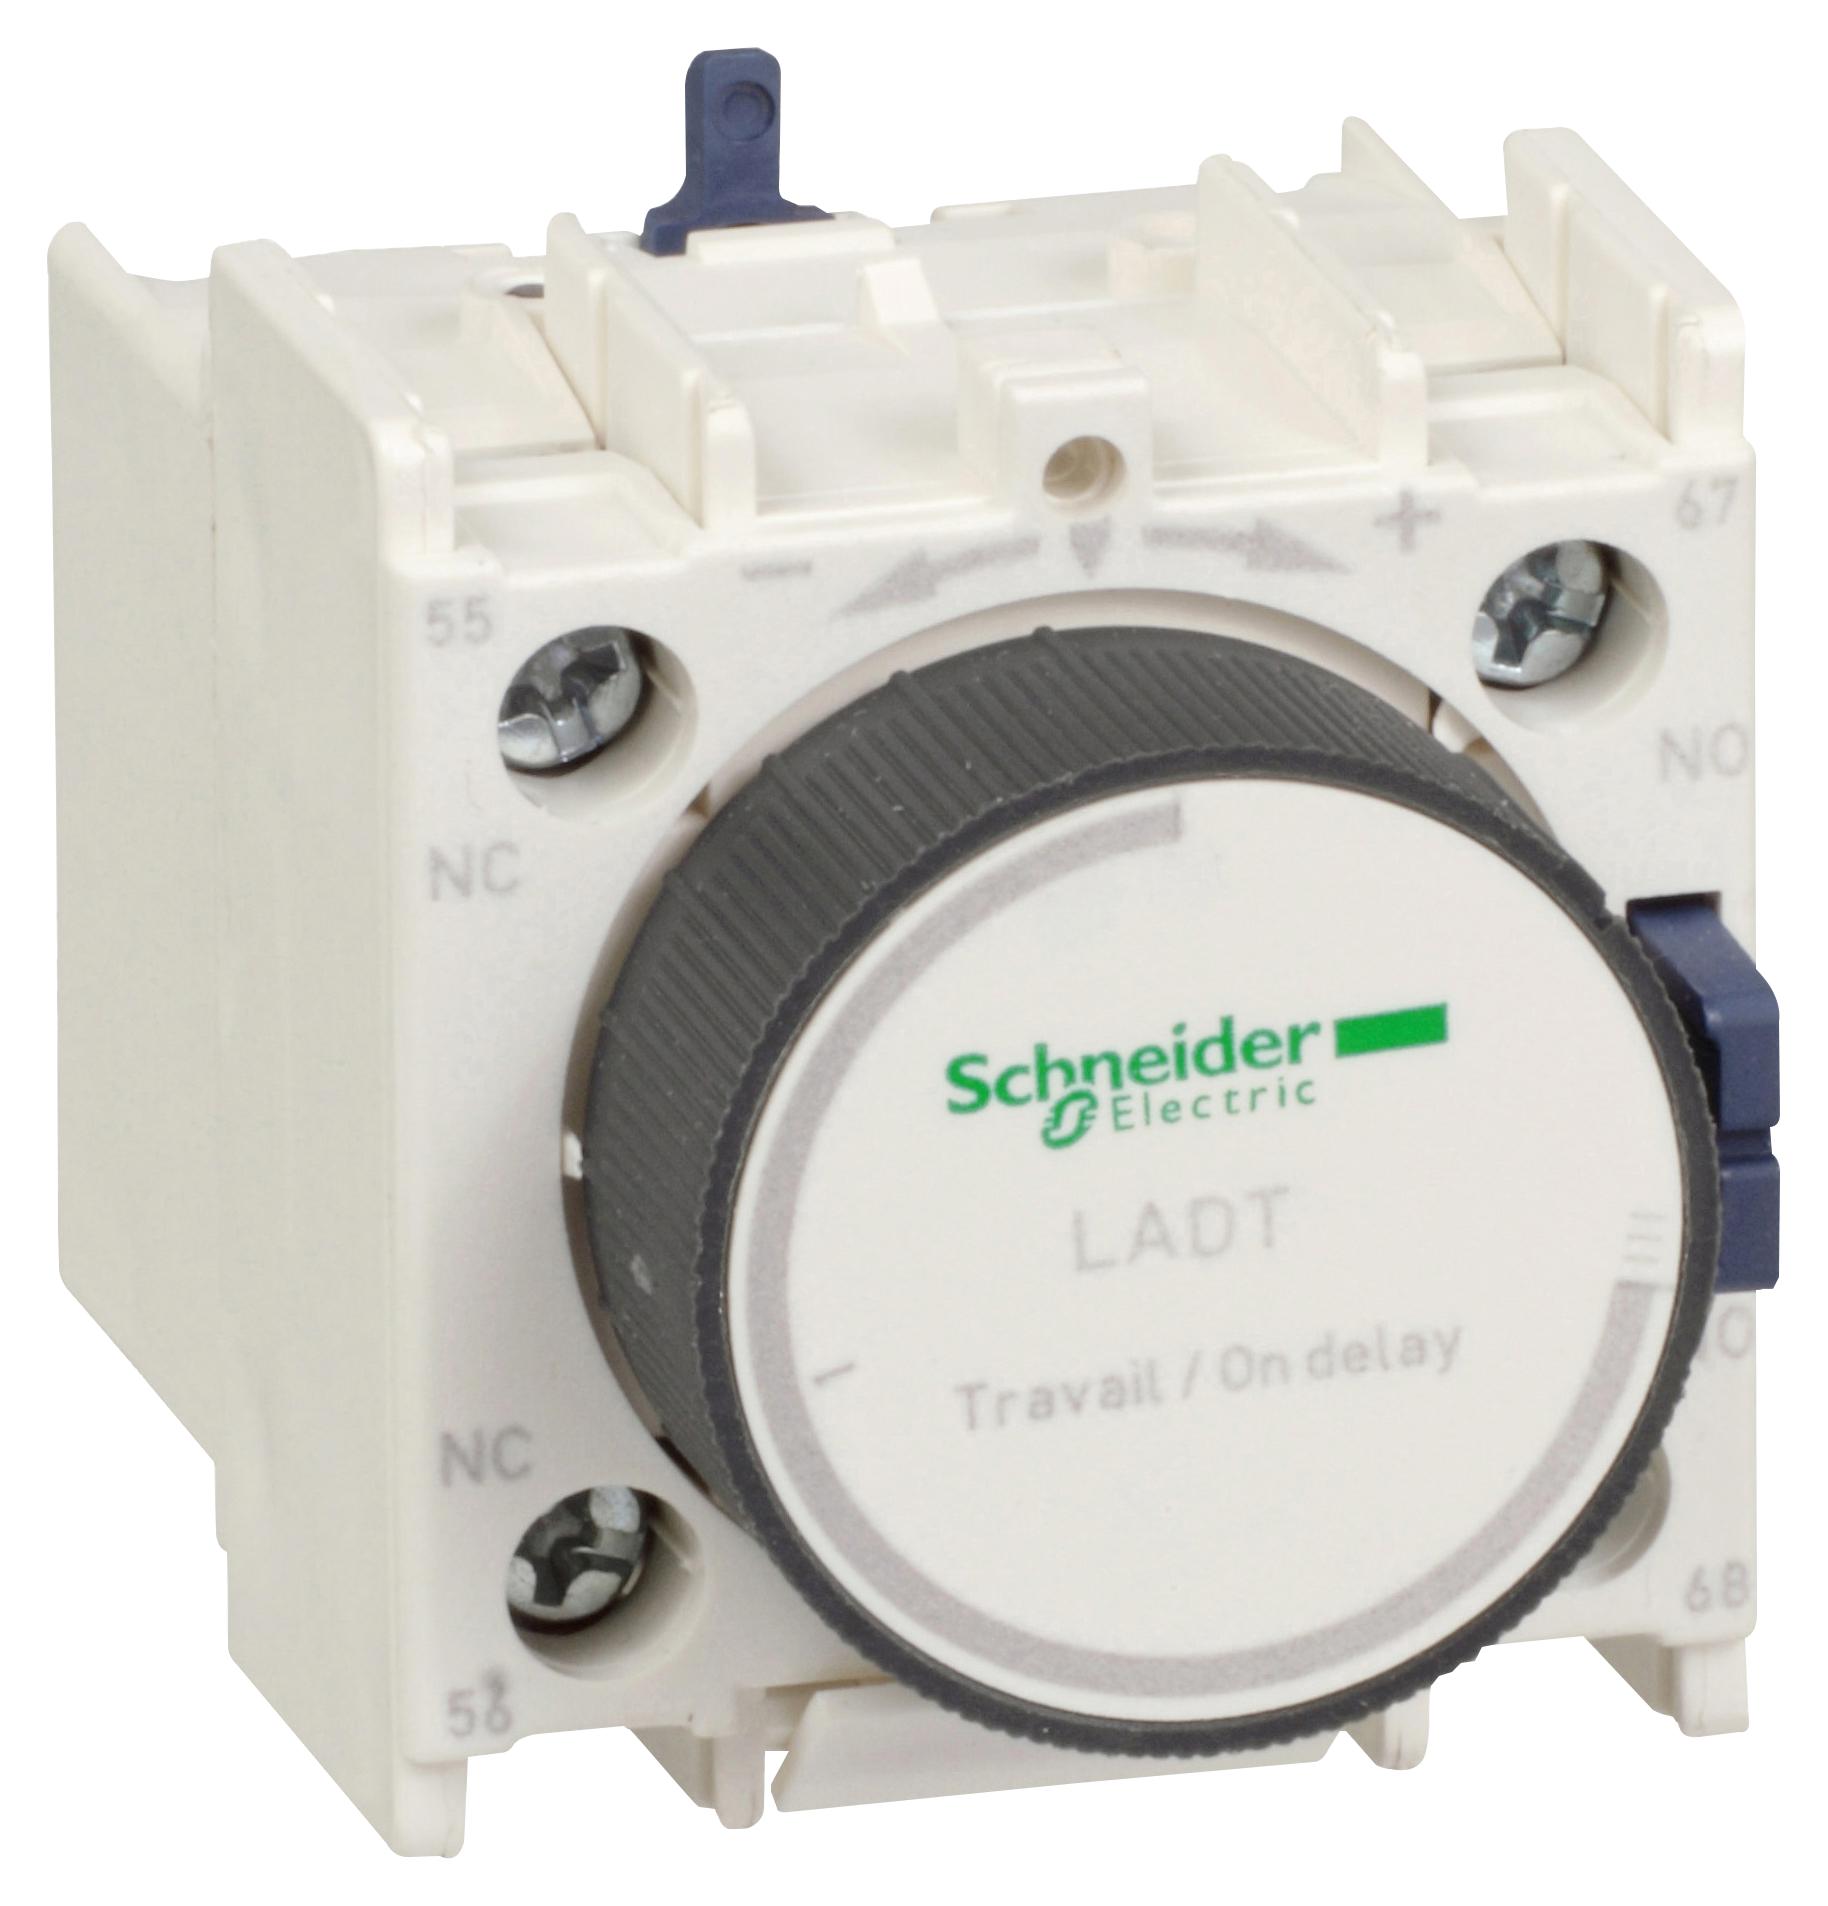 LADR4 AUXILIARY CONTACT BLOCK, SPST-NO/NC SCHNEIDER ELECTRIC